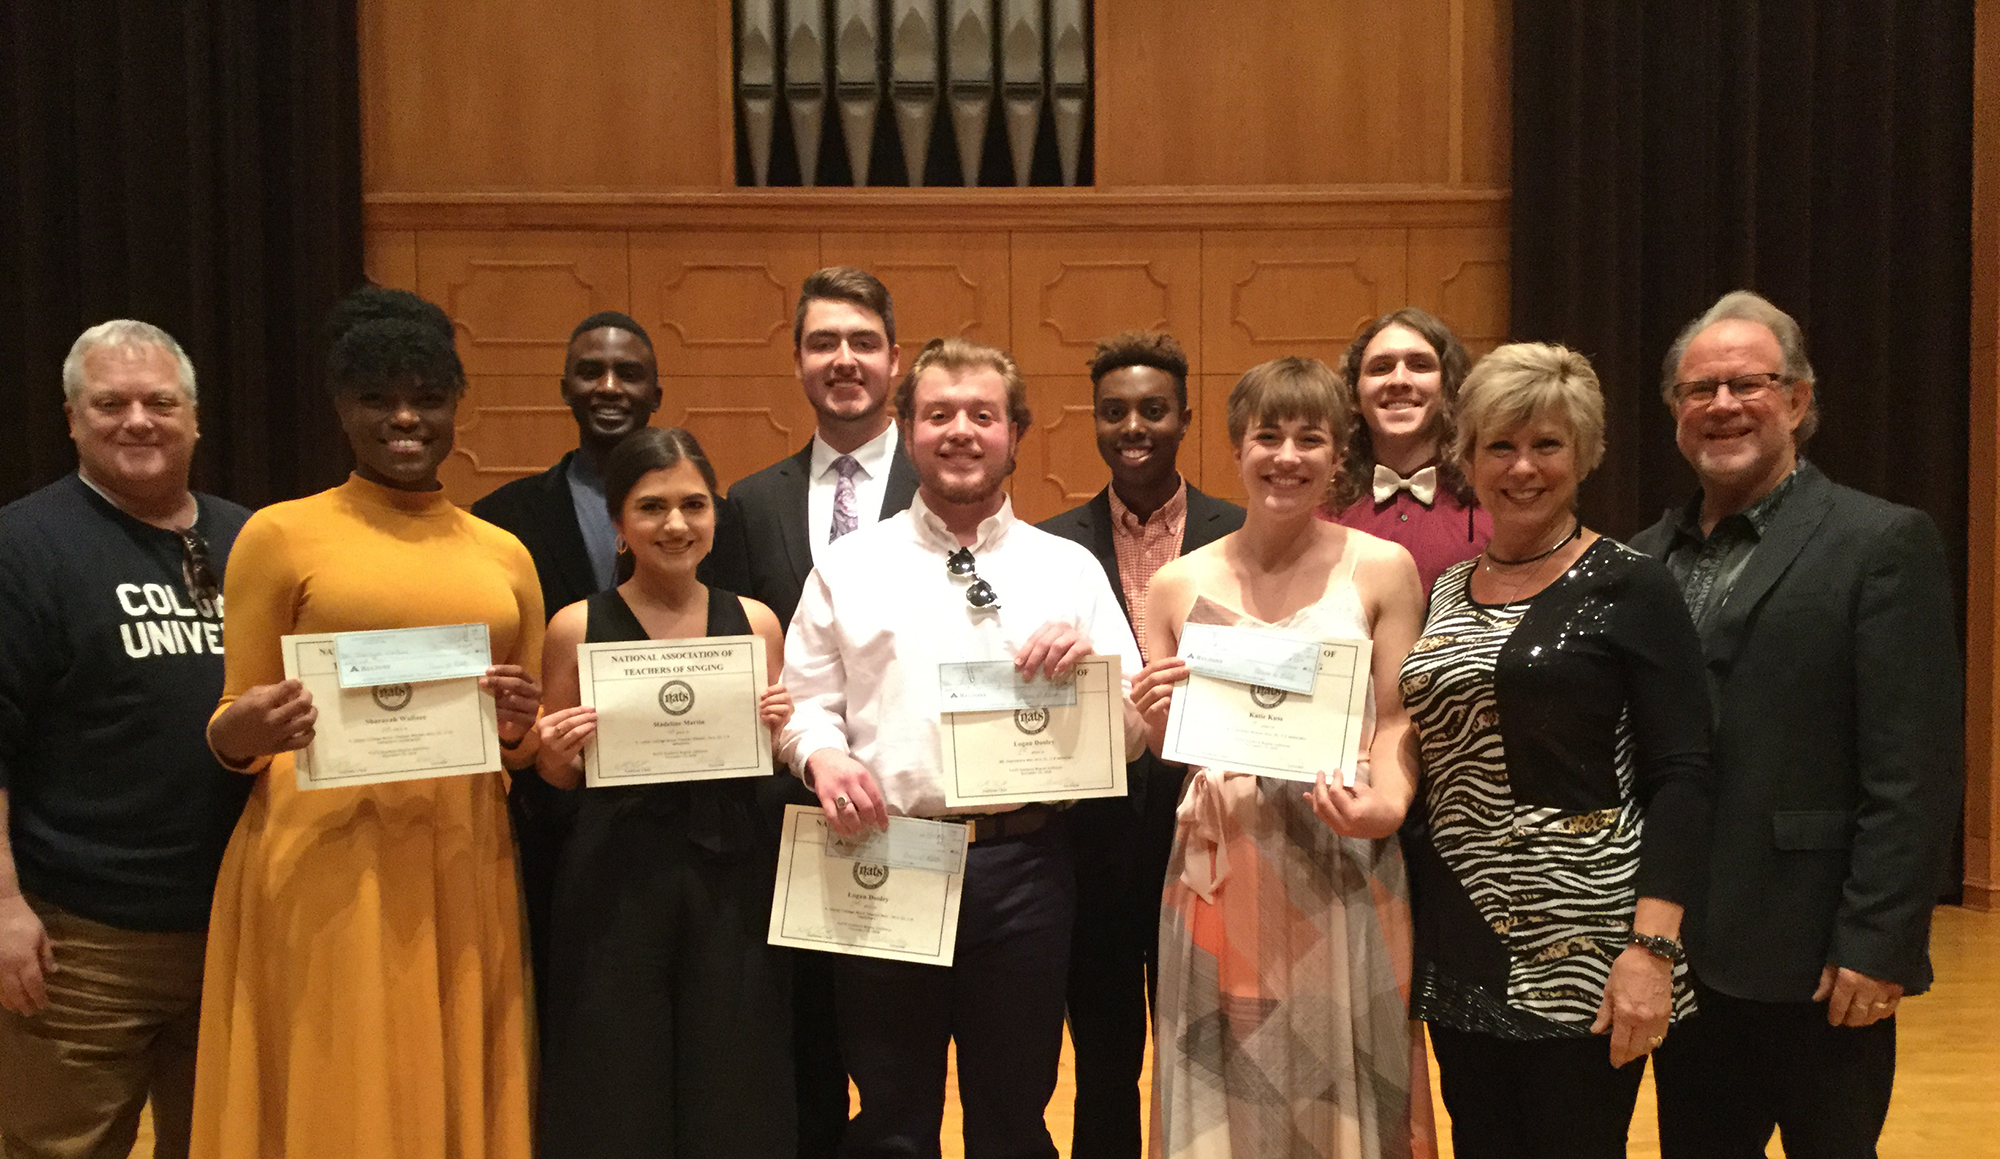 Several Ouachita students earned finalist honors at the recent Southern Region NATS auditions. Joined by faculty members John Alec Briggs, far left, and Glenda and Jon Secrest, far right, some of the student competitors included, from left: Sharayah Wallace, Dean Carmona, Madeline Martin, Clay Mobley, Logan Dooley, Cameron Connor, Katie Kuss and Payton Hickman.